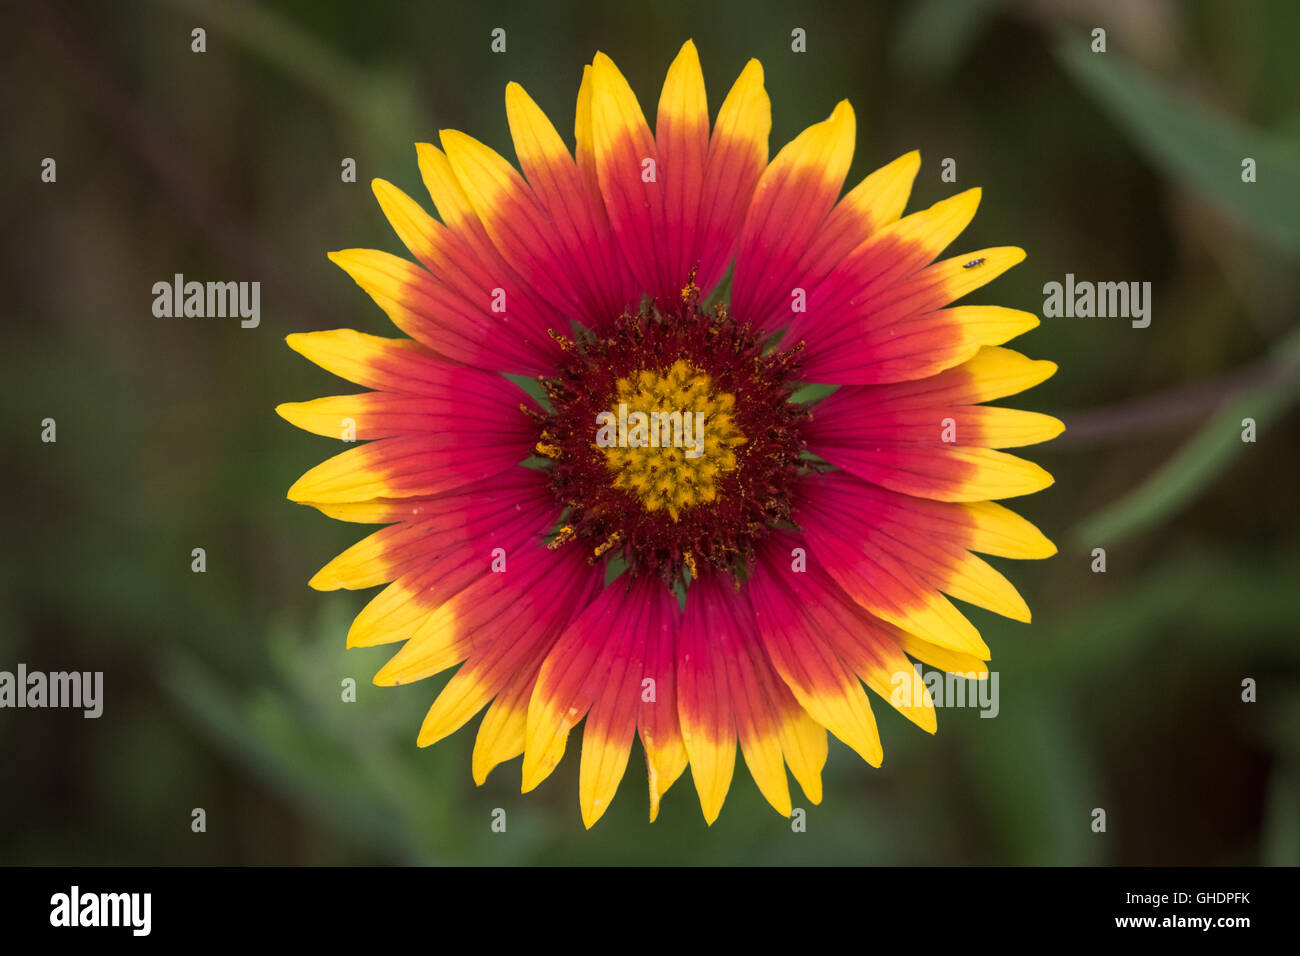 A close up image of a bright yellow and red Indian Blanket, Gaillardia pulchella, flower. Stock Photo